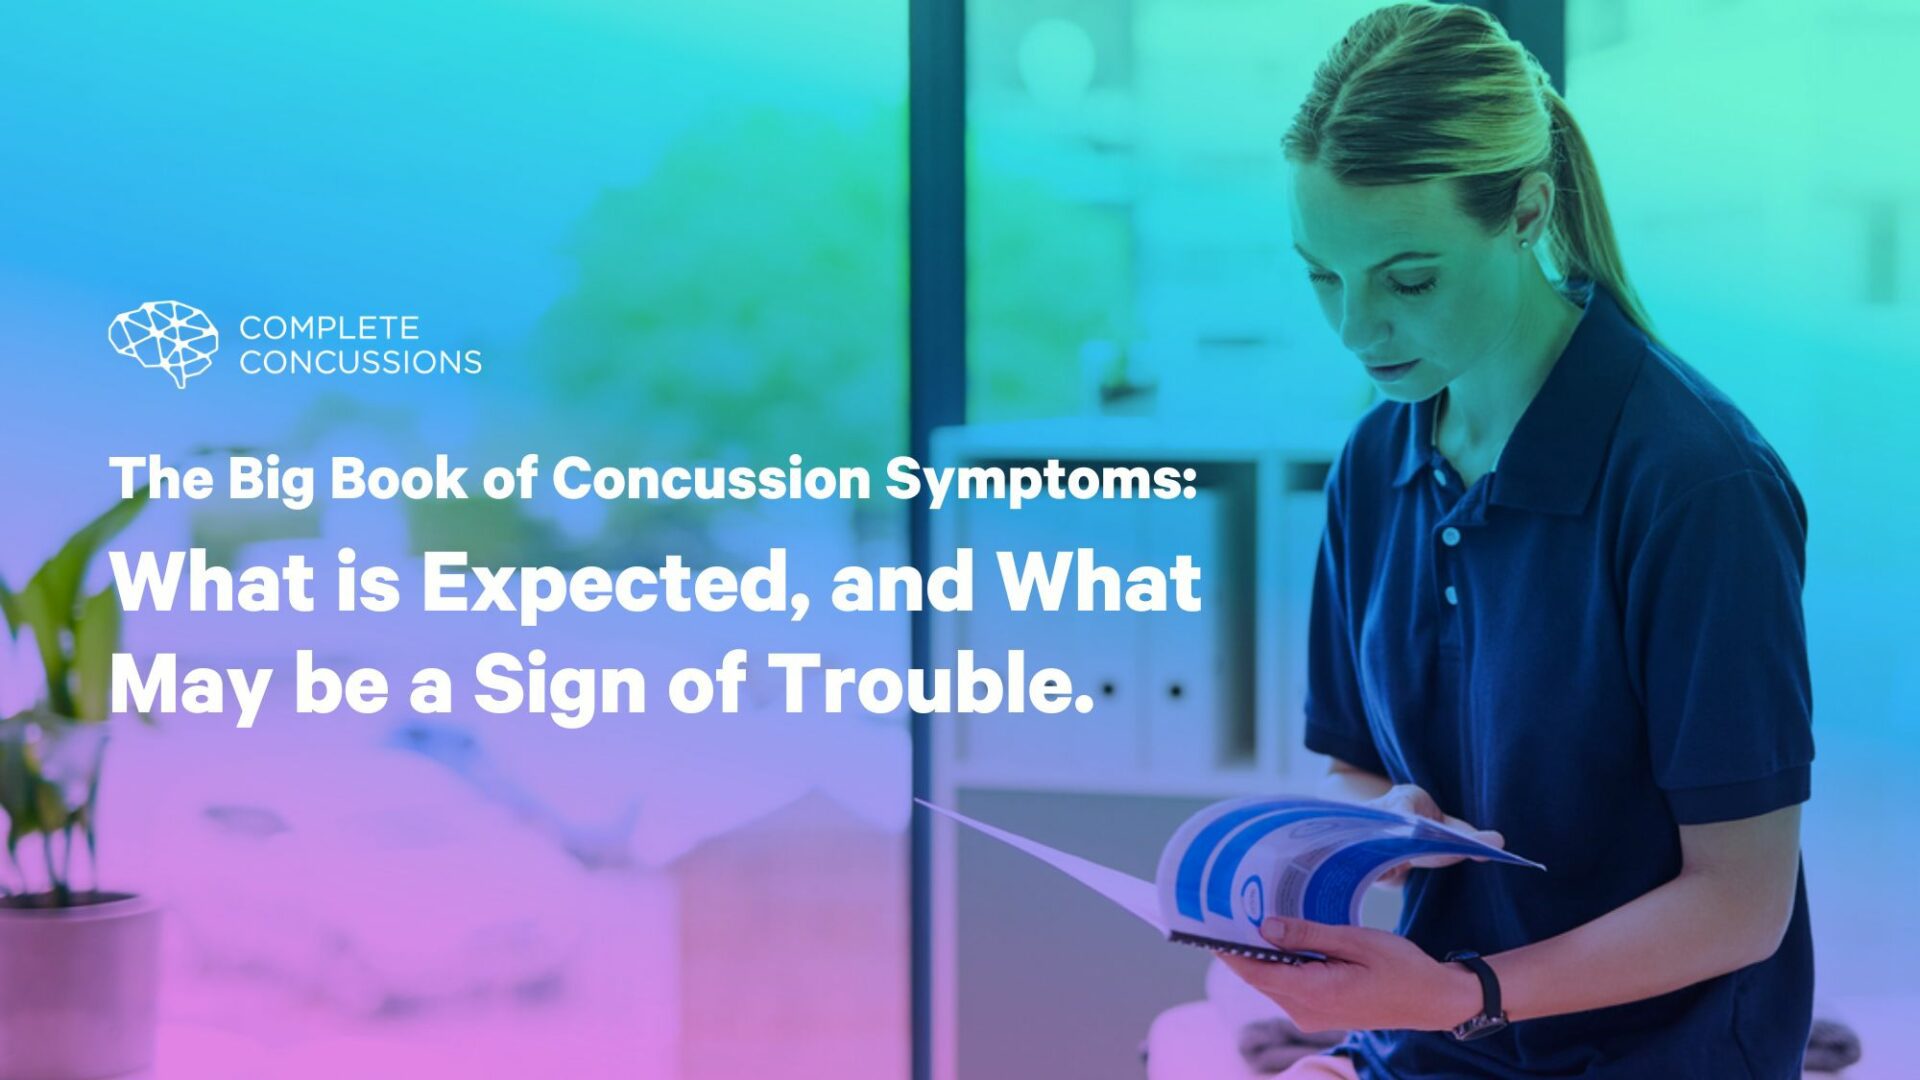 The Big Book of Concussion Symptoms: What is Expected, and What May be a Sign of Trouble